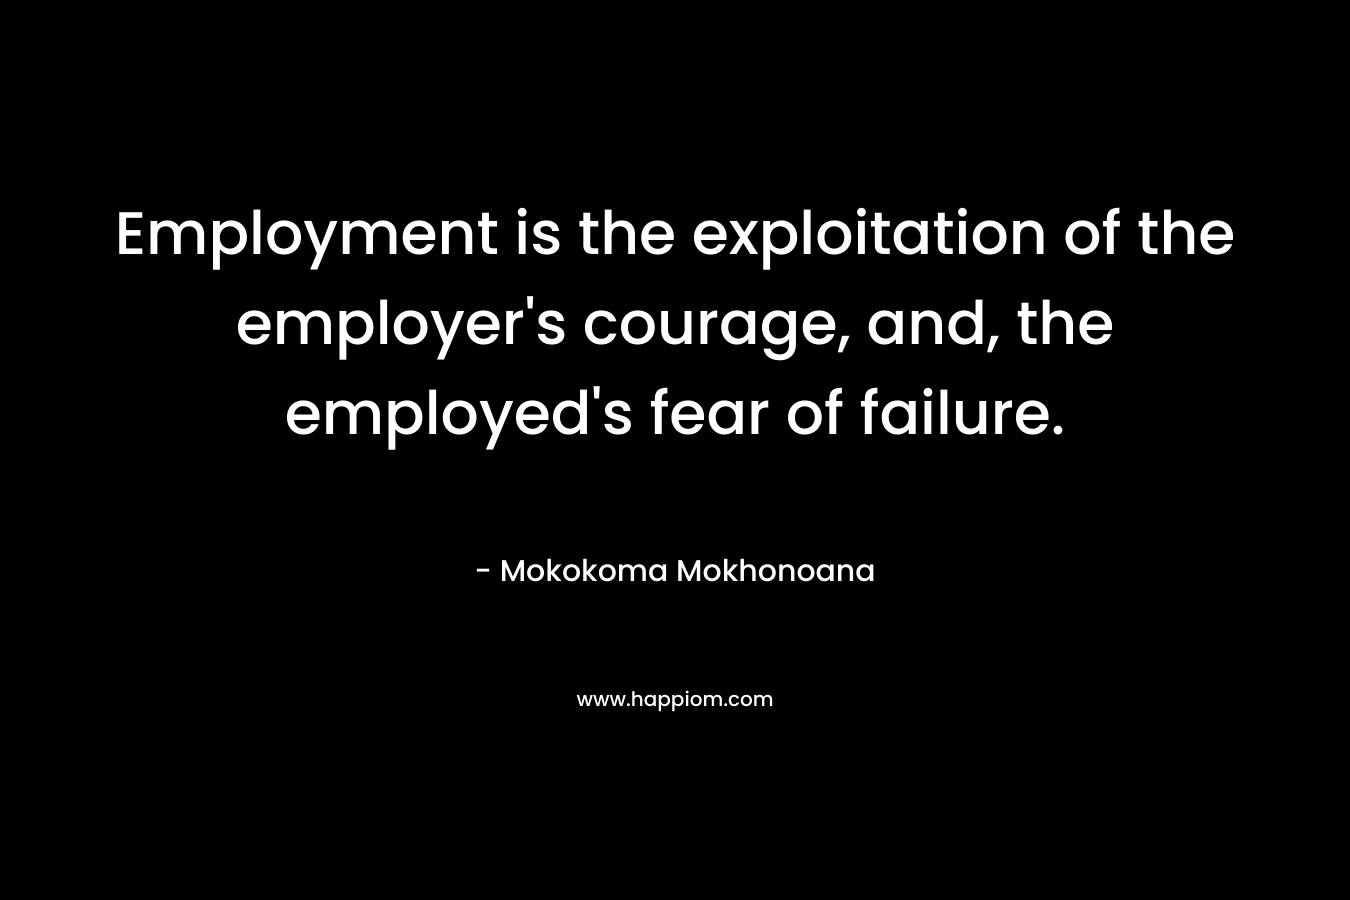 Employment is the exploitation of the employer's courage, and, the employed's fear of failure.